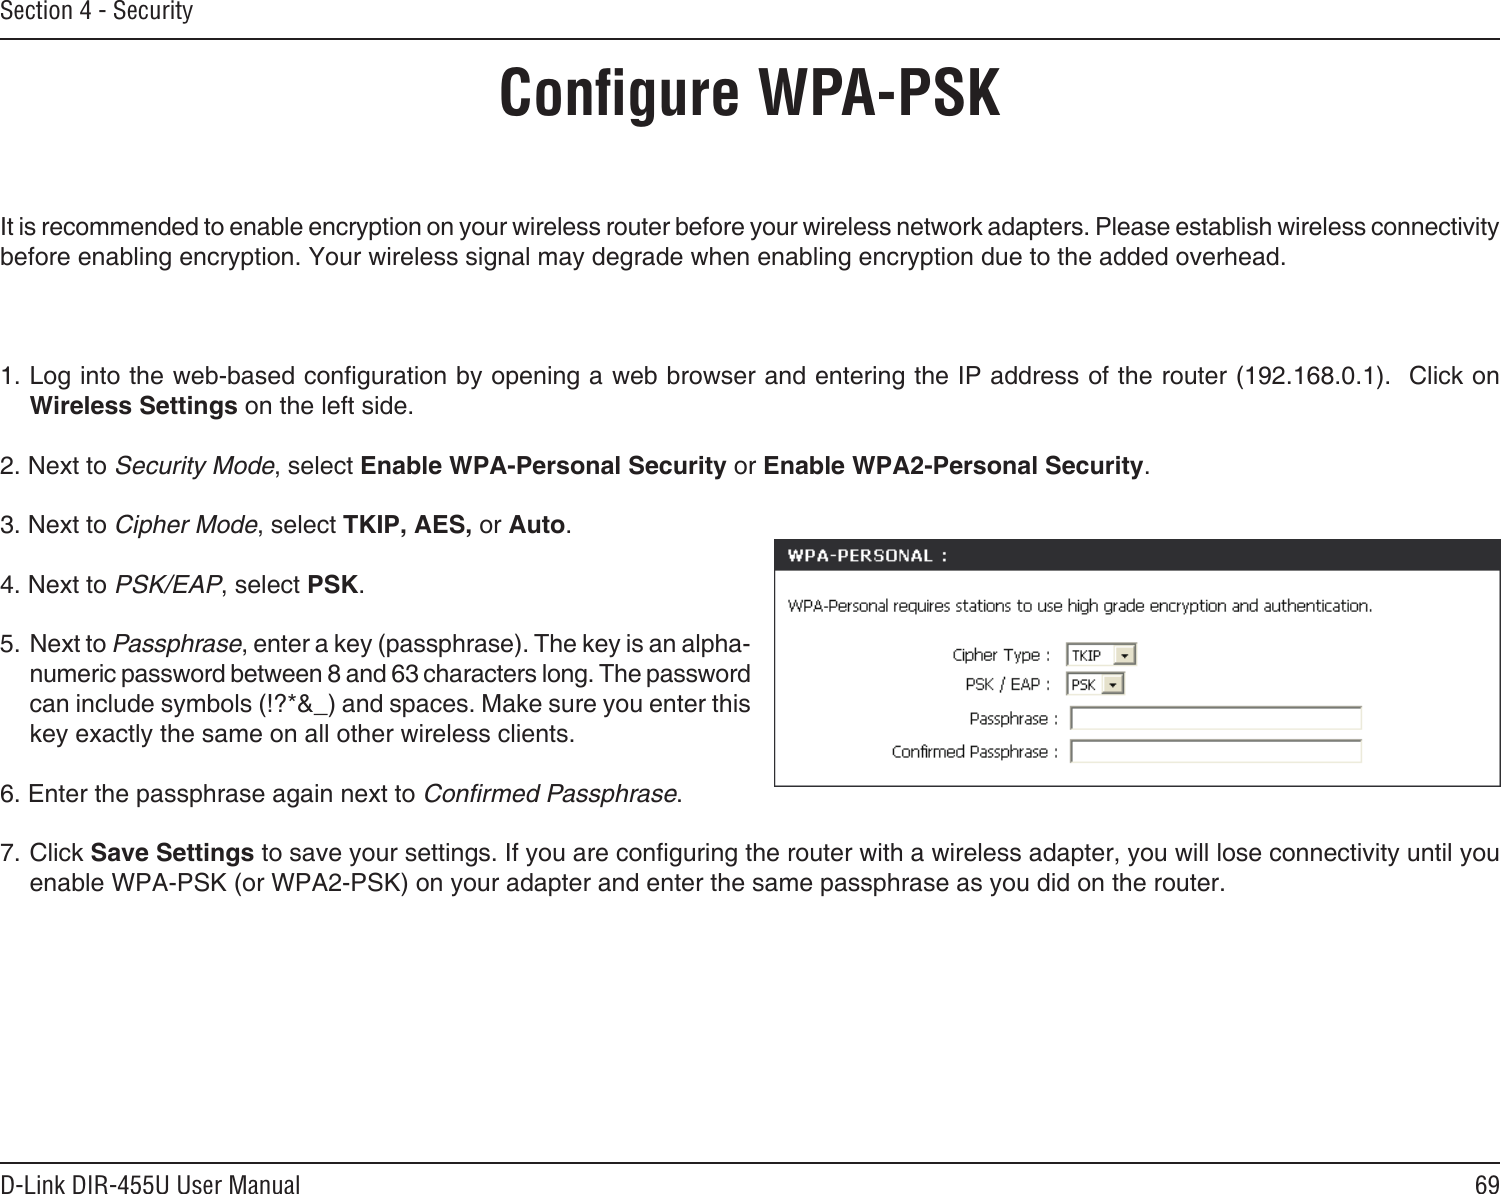 69D-Link DIR-455U User ManualSection 4 - SecurityConﬁgure WPA-PSKIt is recommended to enable encryption on your wireless router before your wireless network adapters. Please establish wireless connectivity before enabling encryption. Your wireless signal may degrade when enabling encryption due to the added overhead.1. Log into the web-based conguration by opening a web browser and entering the IP address of the router (192.168.0.1).  Click on Wireless Settings on the left side.2. Next to Security Mode, select Enable WPA-Personal Security or Enable WPA2-Personal Security.3. Next to Cipher Mode, select TKIP, AES, or Auto.4. Next to PSK/EAP, select PSK.5. Next to Passphrase, enter a key (passphrase). The key is an alpha-numeric password between 8 and 63 characters long. The password can include symbols (!?*&amp;_) and spaces. Make sure you enter this key exactly the same on all other wireless clients.6. Enter the passphrase again next to Conﬁrmed Passphrase.7. Click Save Settings to save your settings. If you are conguring the router with a wireless adapter, you will lose connectivity until you enable WPA-PSK (or WPA2-PSK) on your adapter and enter the same passphrase as you did on the router.